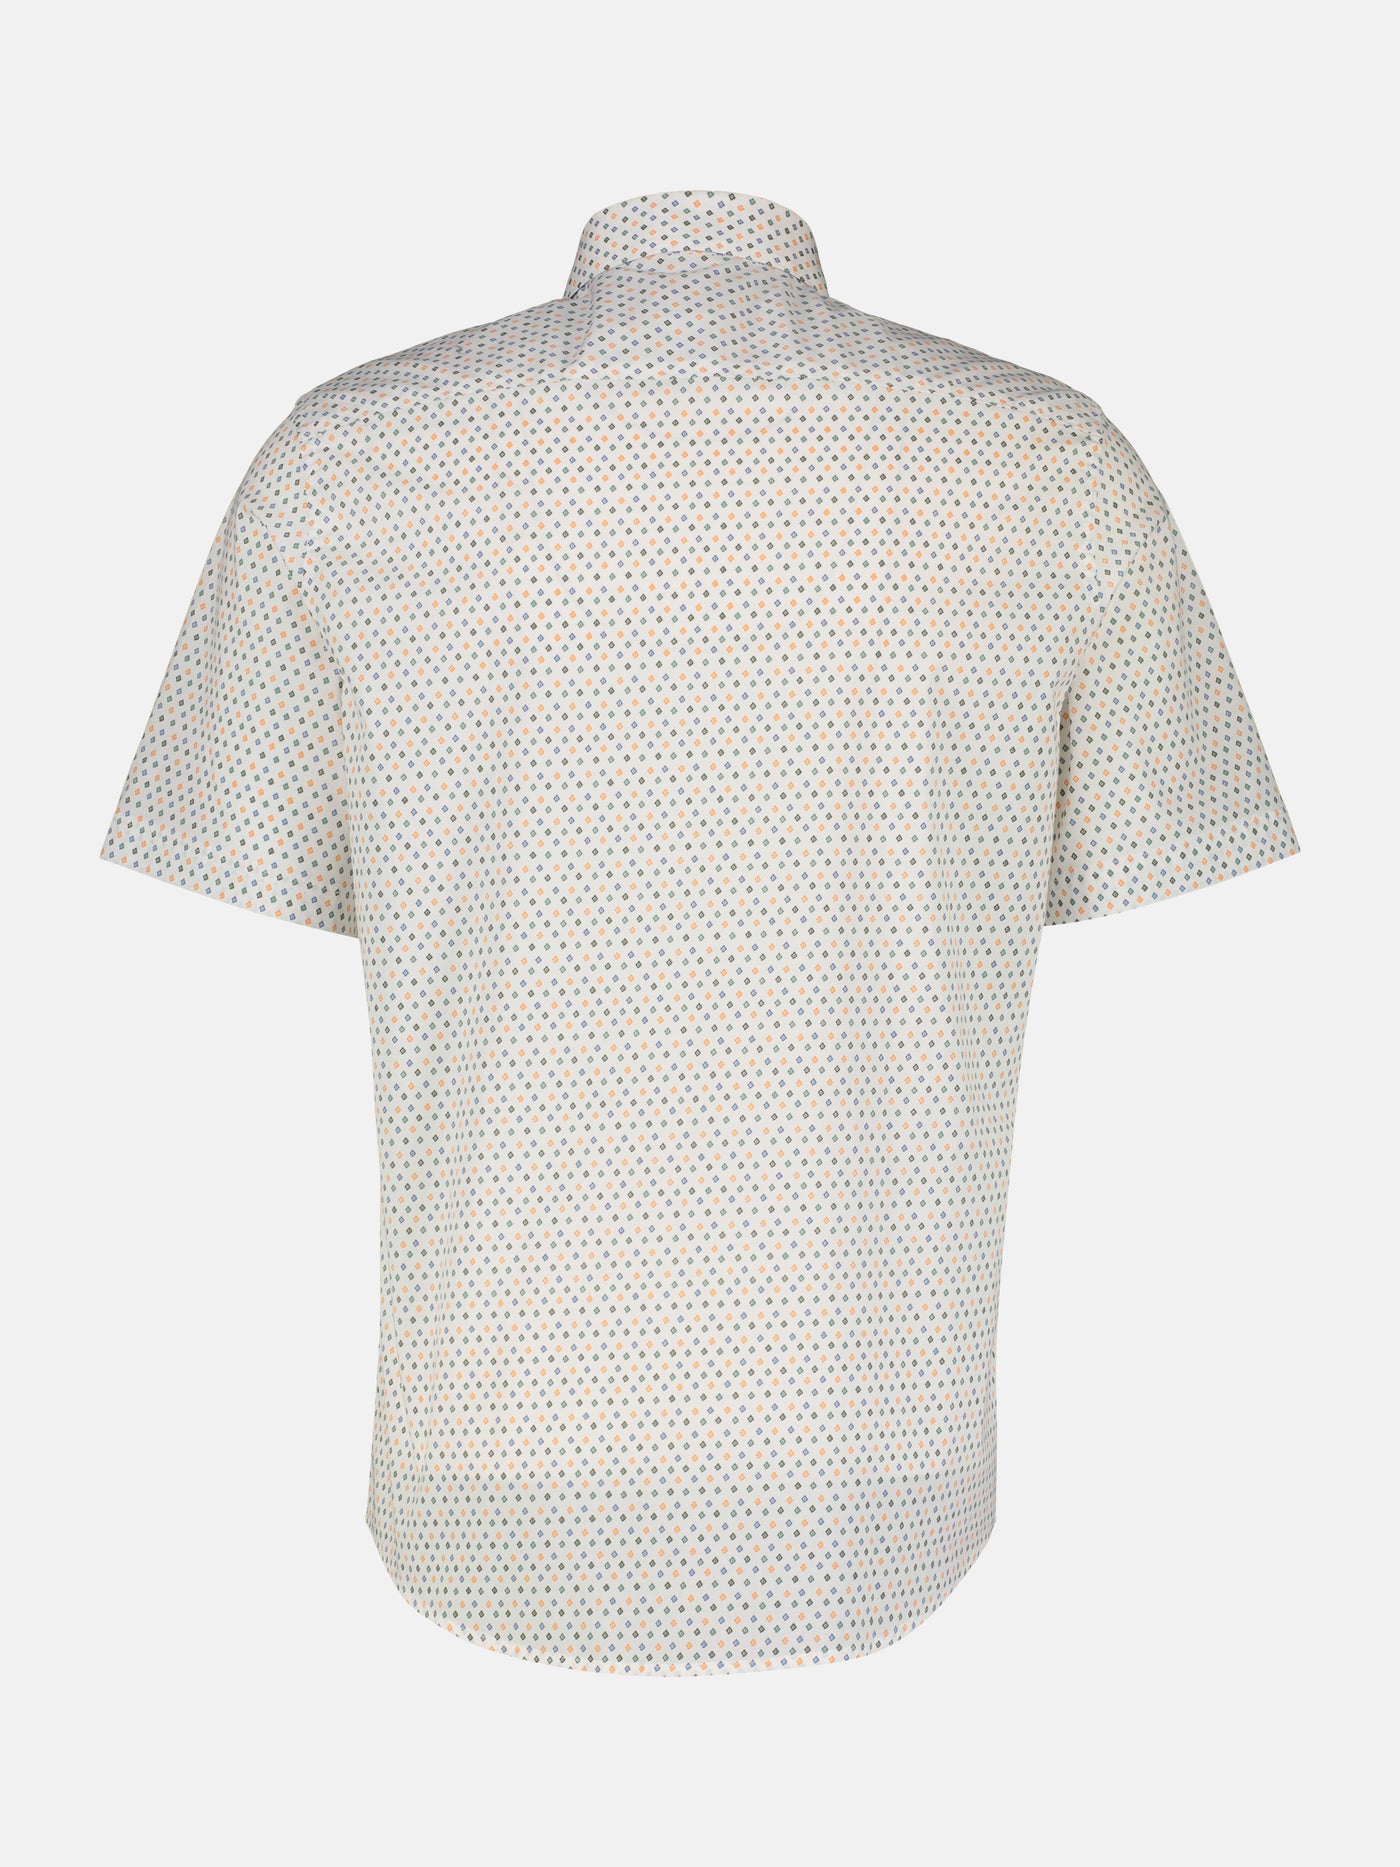 Short-sleeved shirt with a geometric pattern